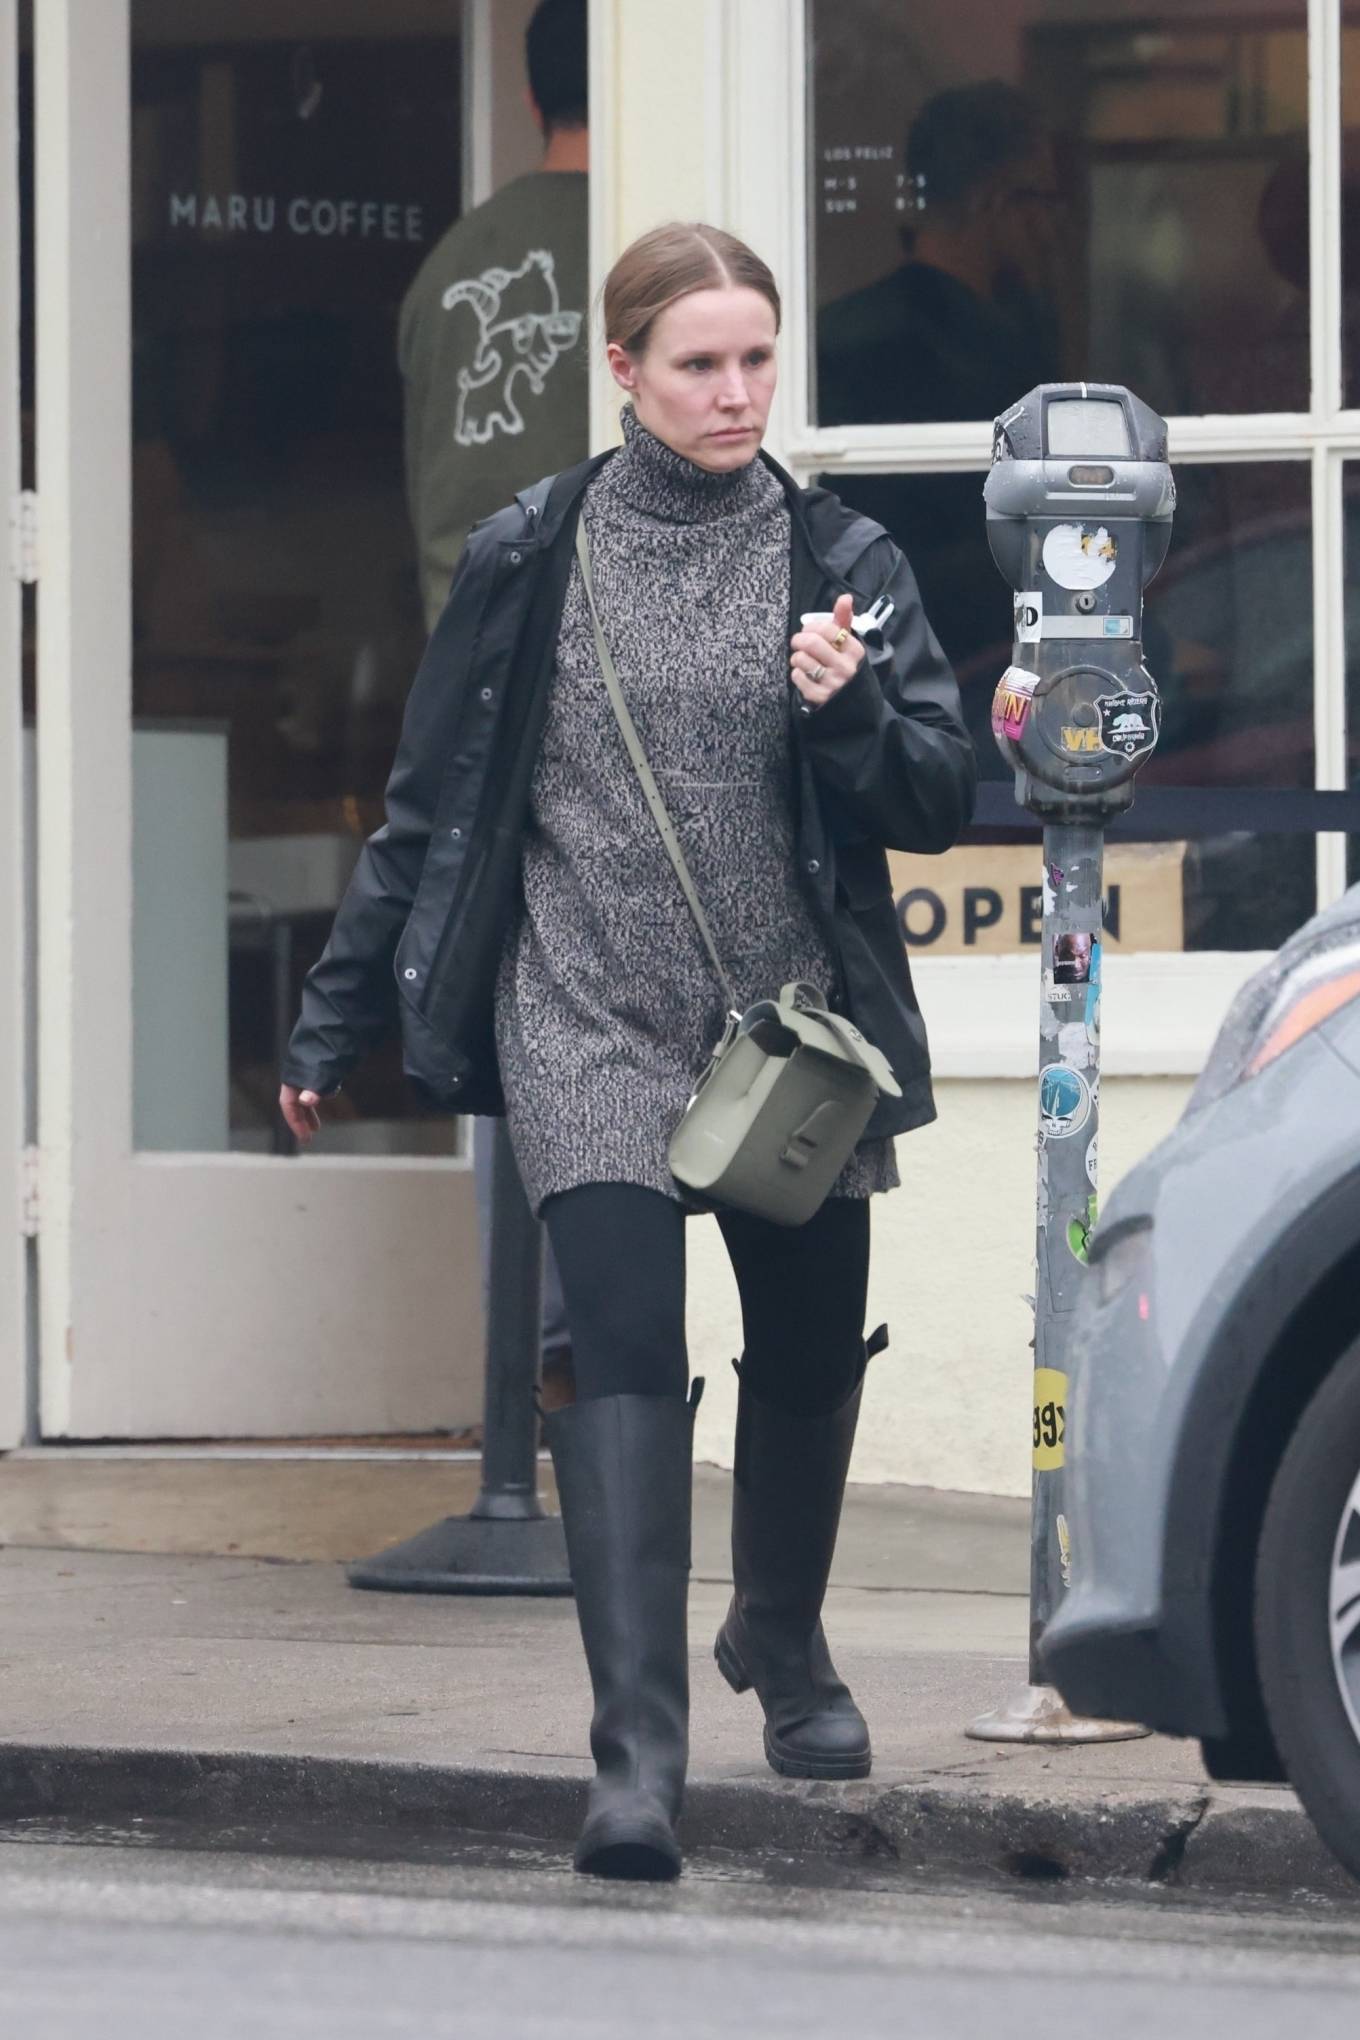 Kristen Bell - In a leather jacket on her way to the gym in Los Feliz